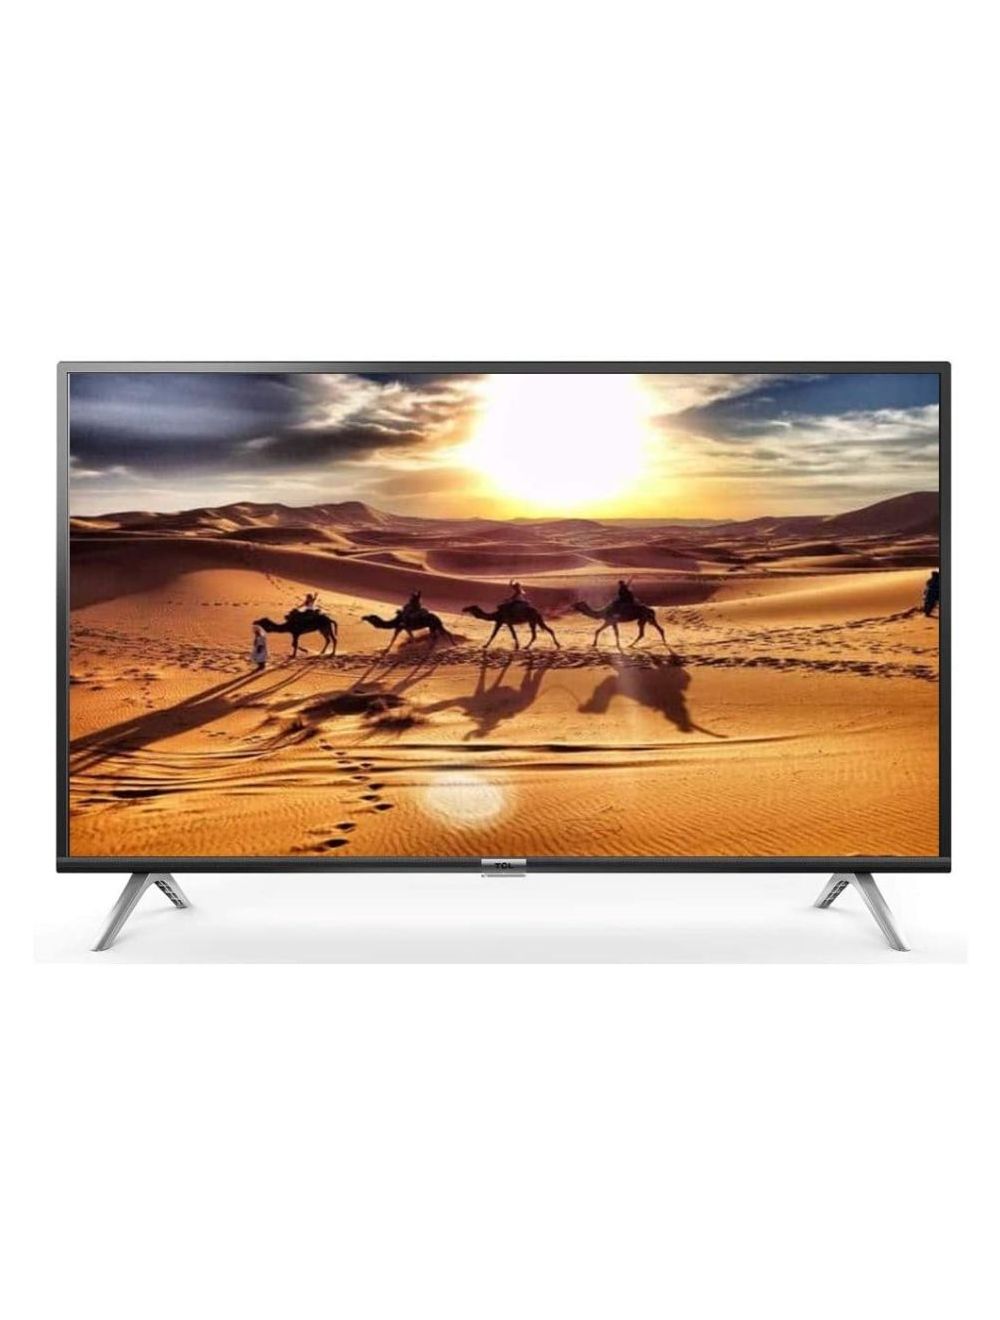 TCL 43 Inch Full High Definition Android LED TV-LED43S6550FS